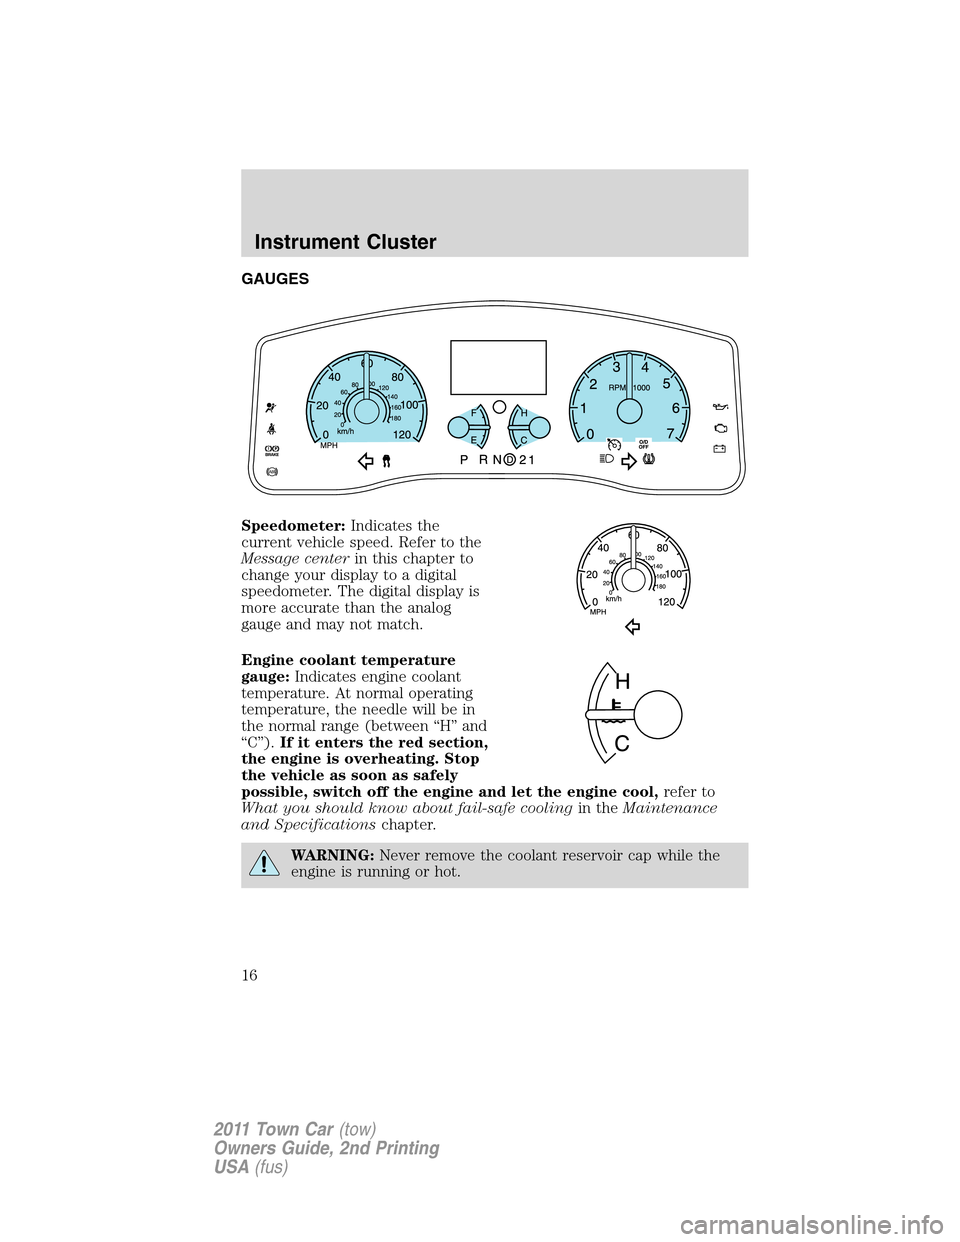 LINCOLN TOWN CAR 2011  Owners Manual GAUGES
Speedometer:Indicates the
current vehicle speed. Refer to the
Message centerin this chapter to
change your display to a digital
speedometer. The digital display is
more accurate than the analog